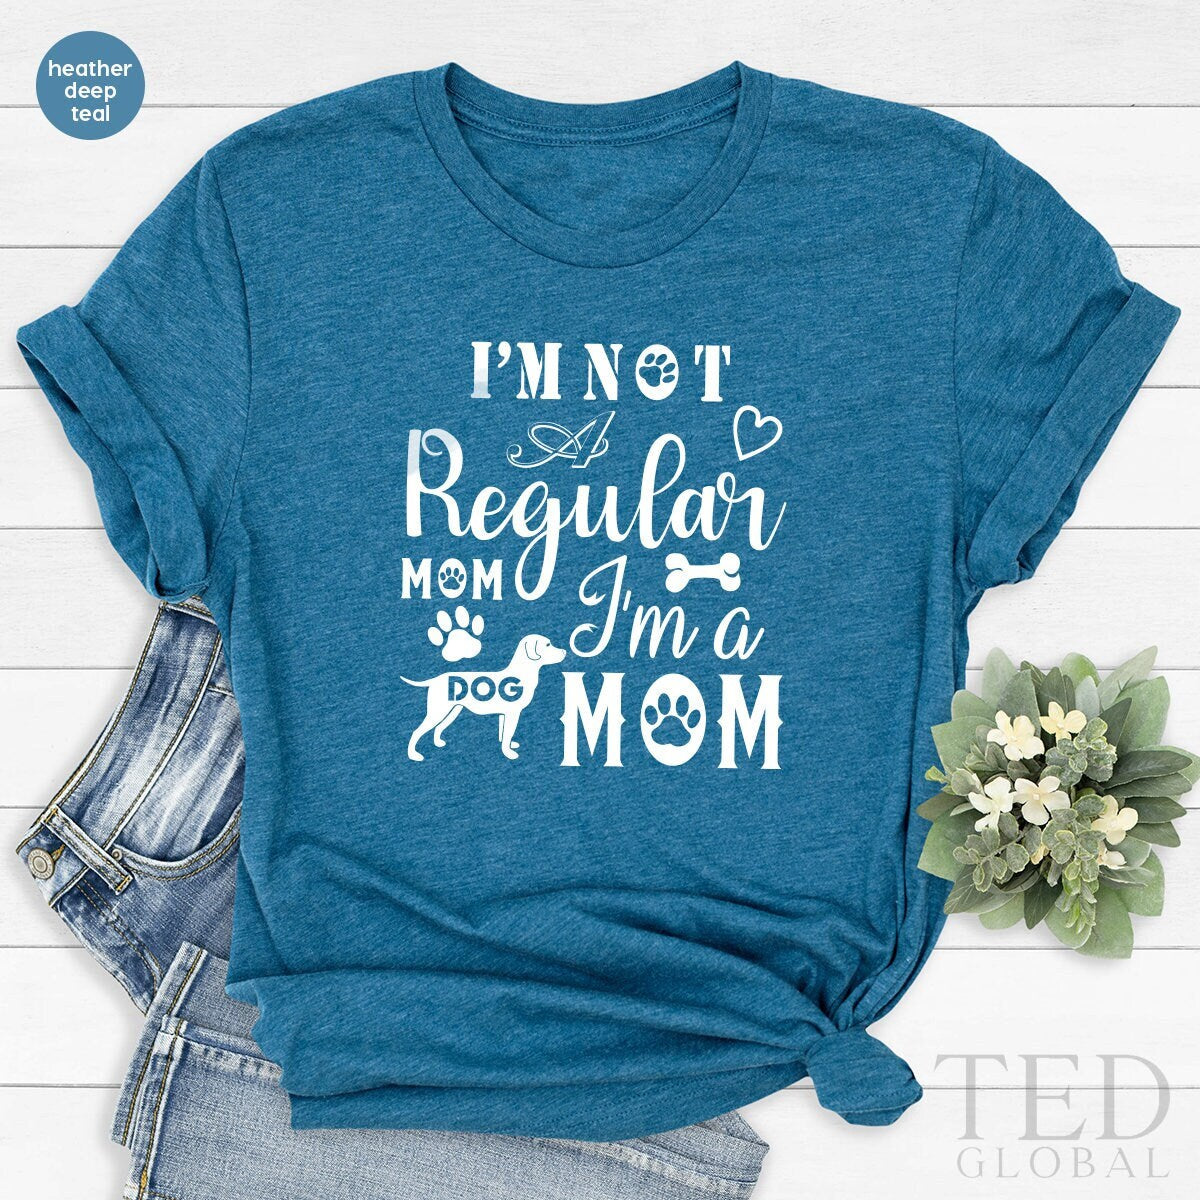 Dog Mom T-Shirt, Dog Lover T Shirt, Personalized Pet Mom TShirt, Mothers Day Shirts, Dog Owner Gift, Dog Mama Hoodies, Dog Shirt For Women - Fastdeliverytees.com